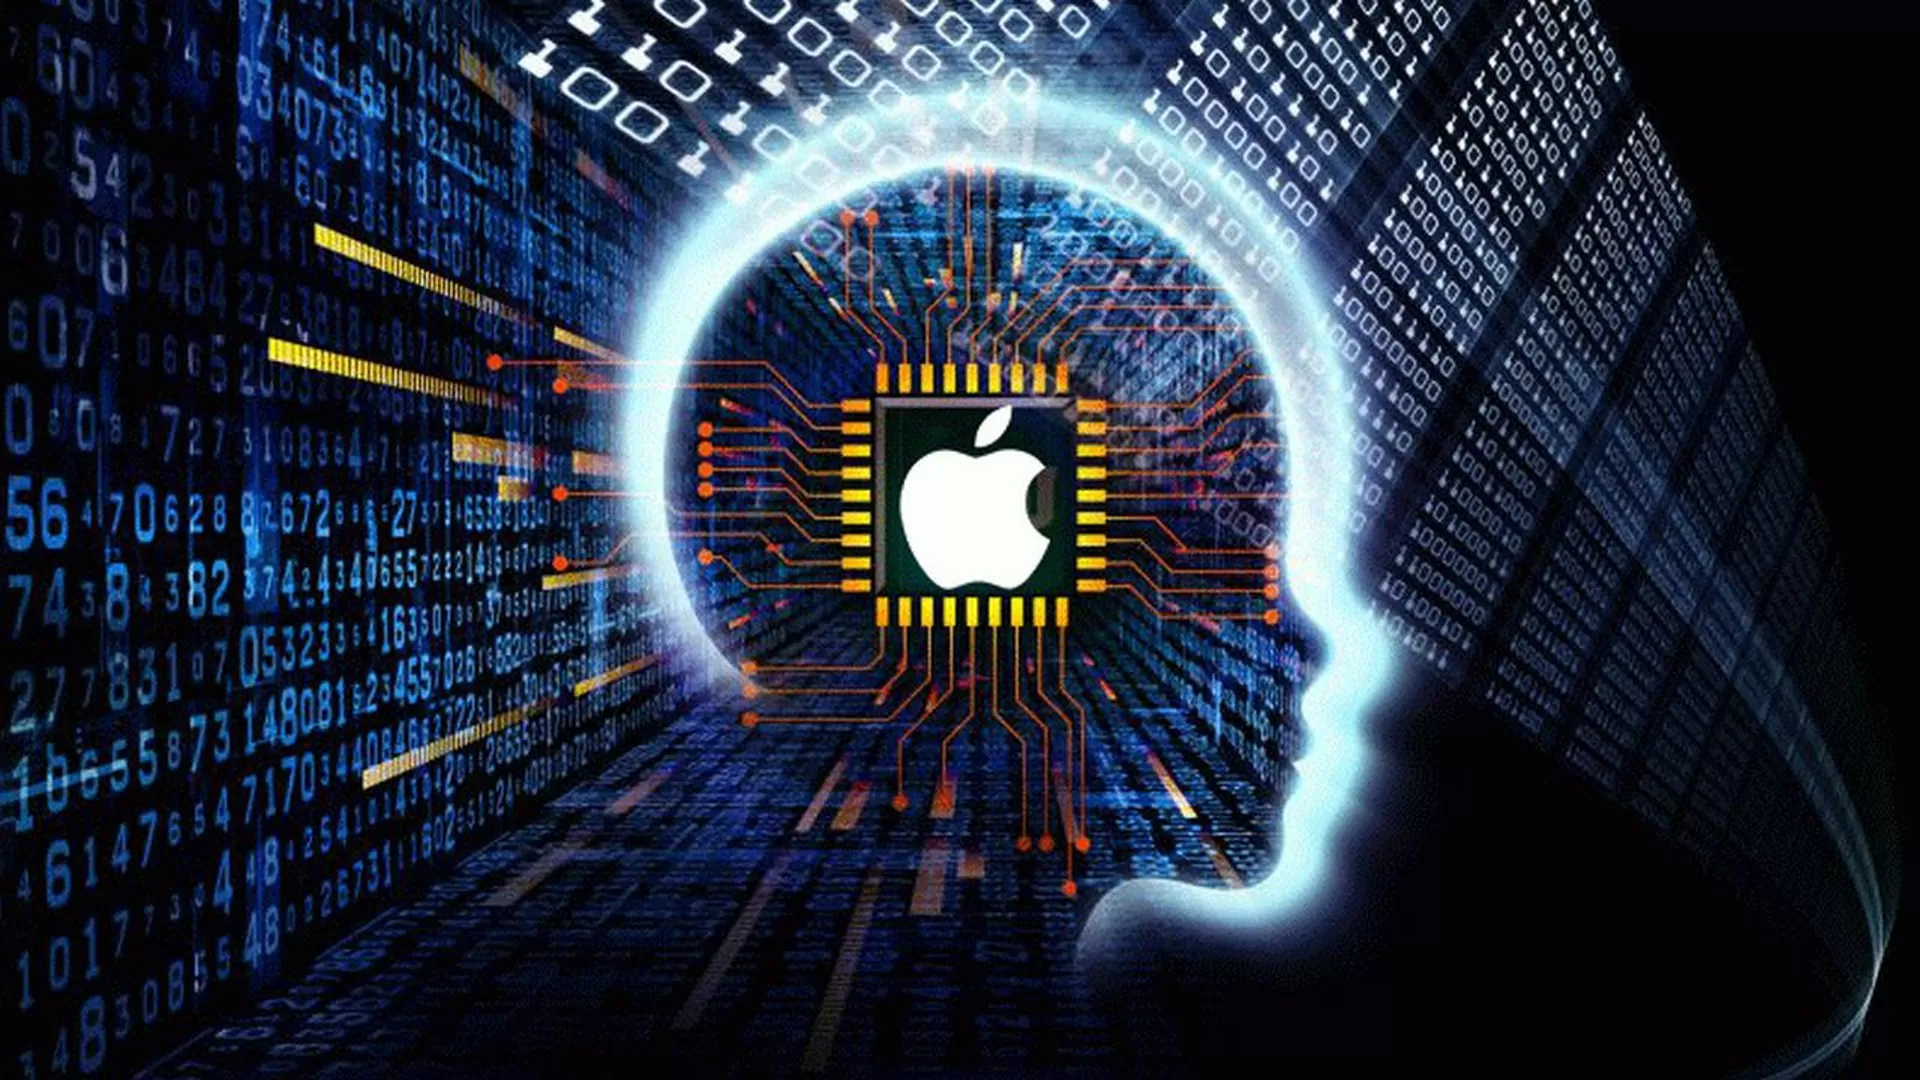 Apple Shifts Gears Swapping Car Dreams for AI Revolution-